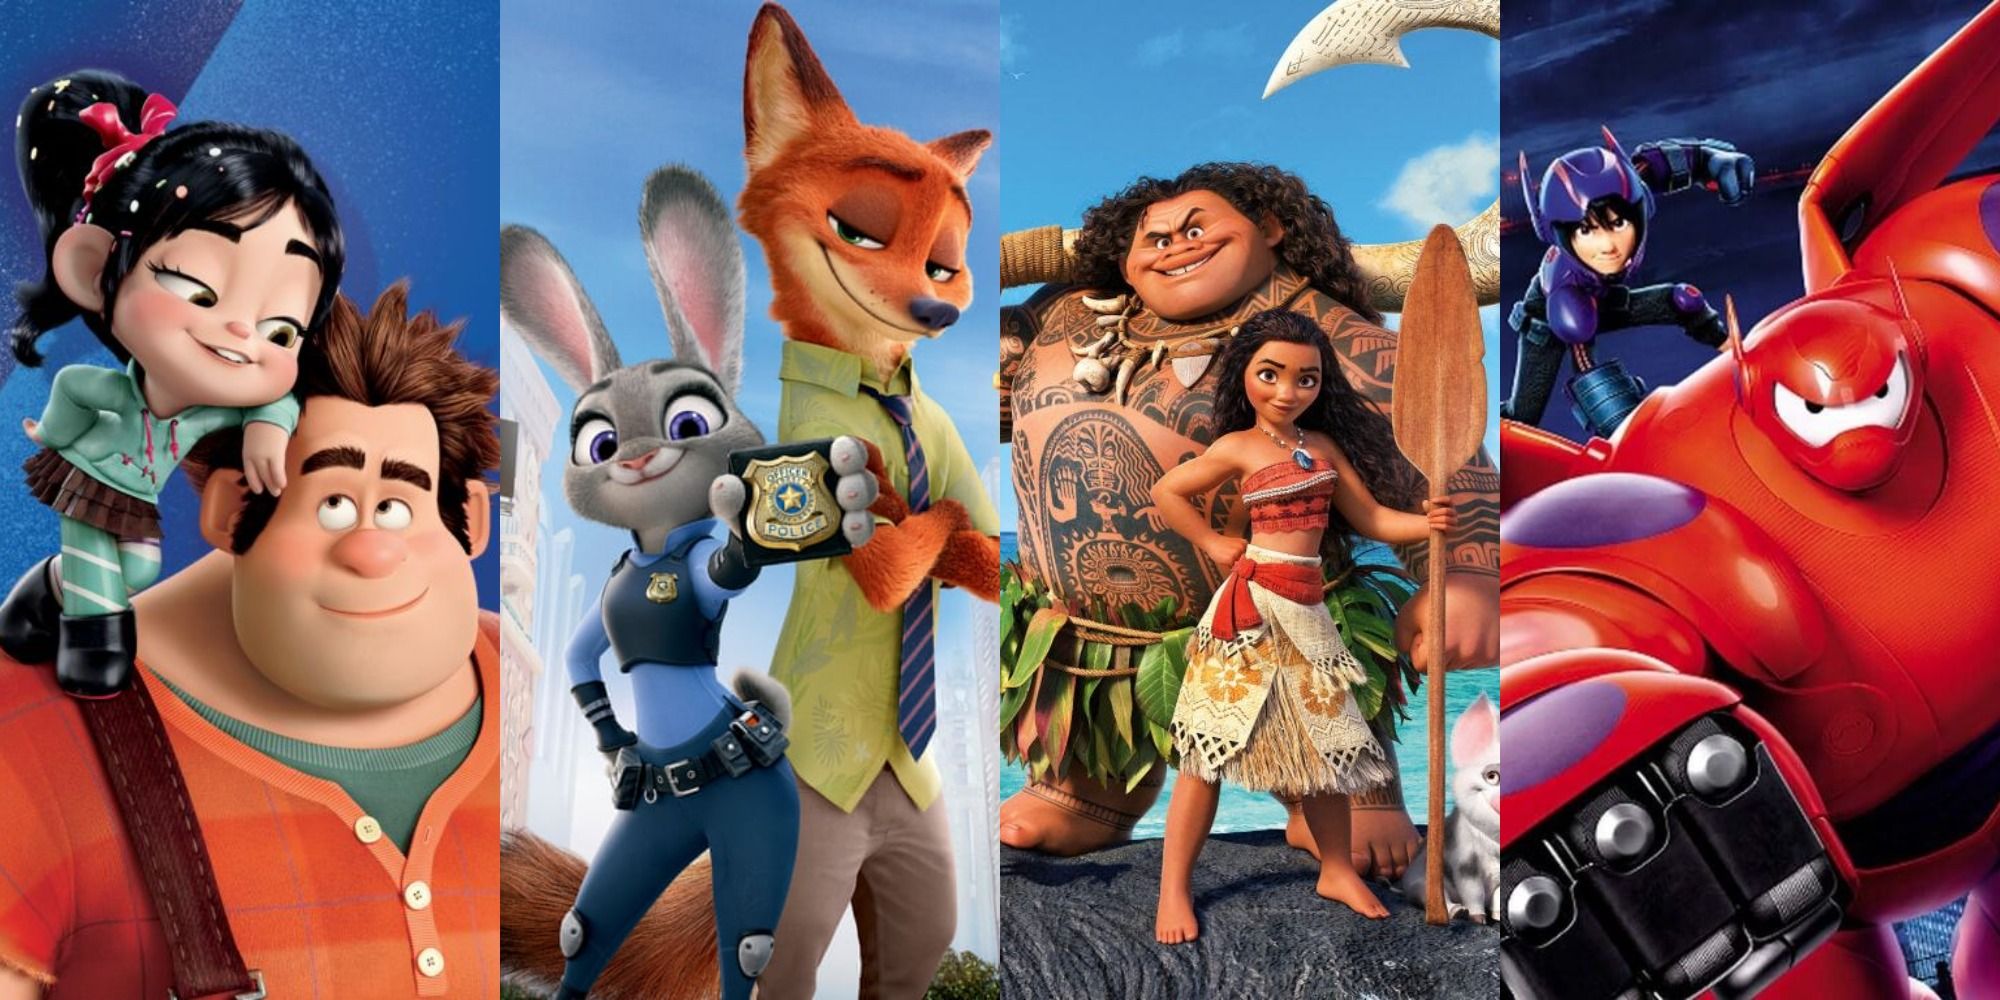 Split image of the main characters from the posters of Wreck It Ralph Zootopia Moana and Big Hero 6